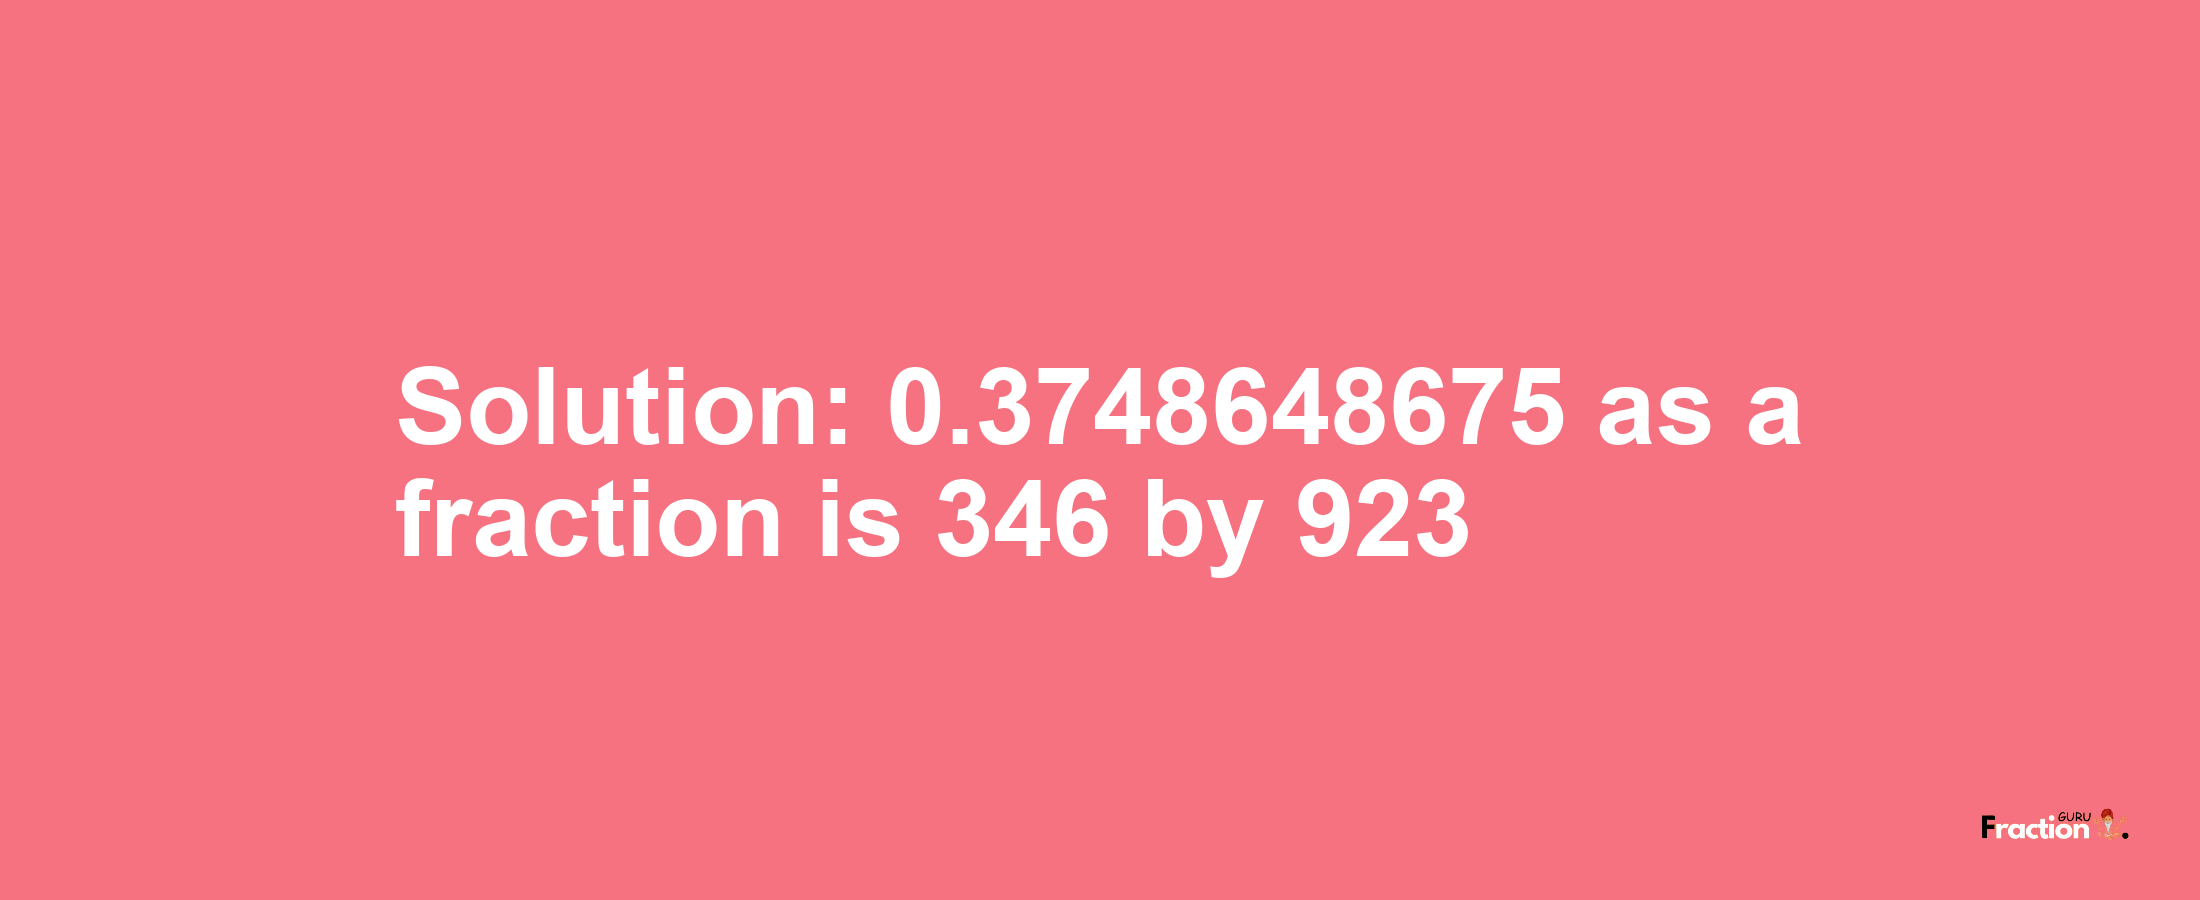 Solution:0.3748648675 as a fraction is 346/923